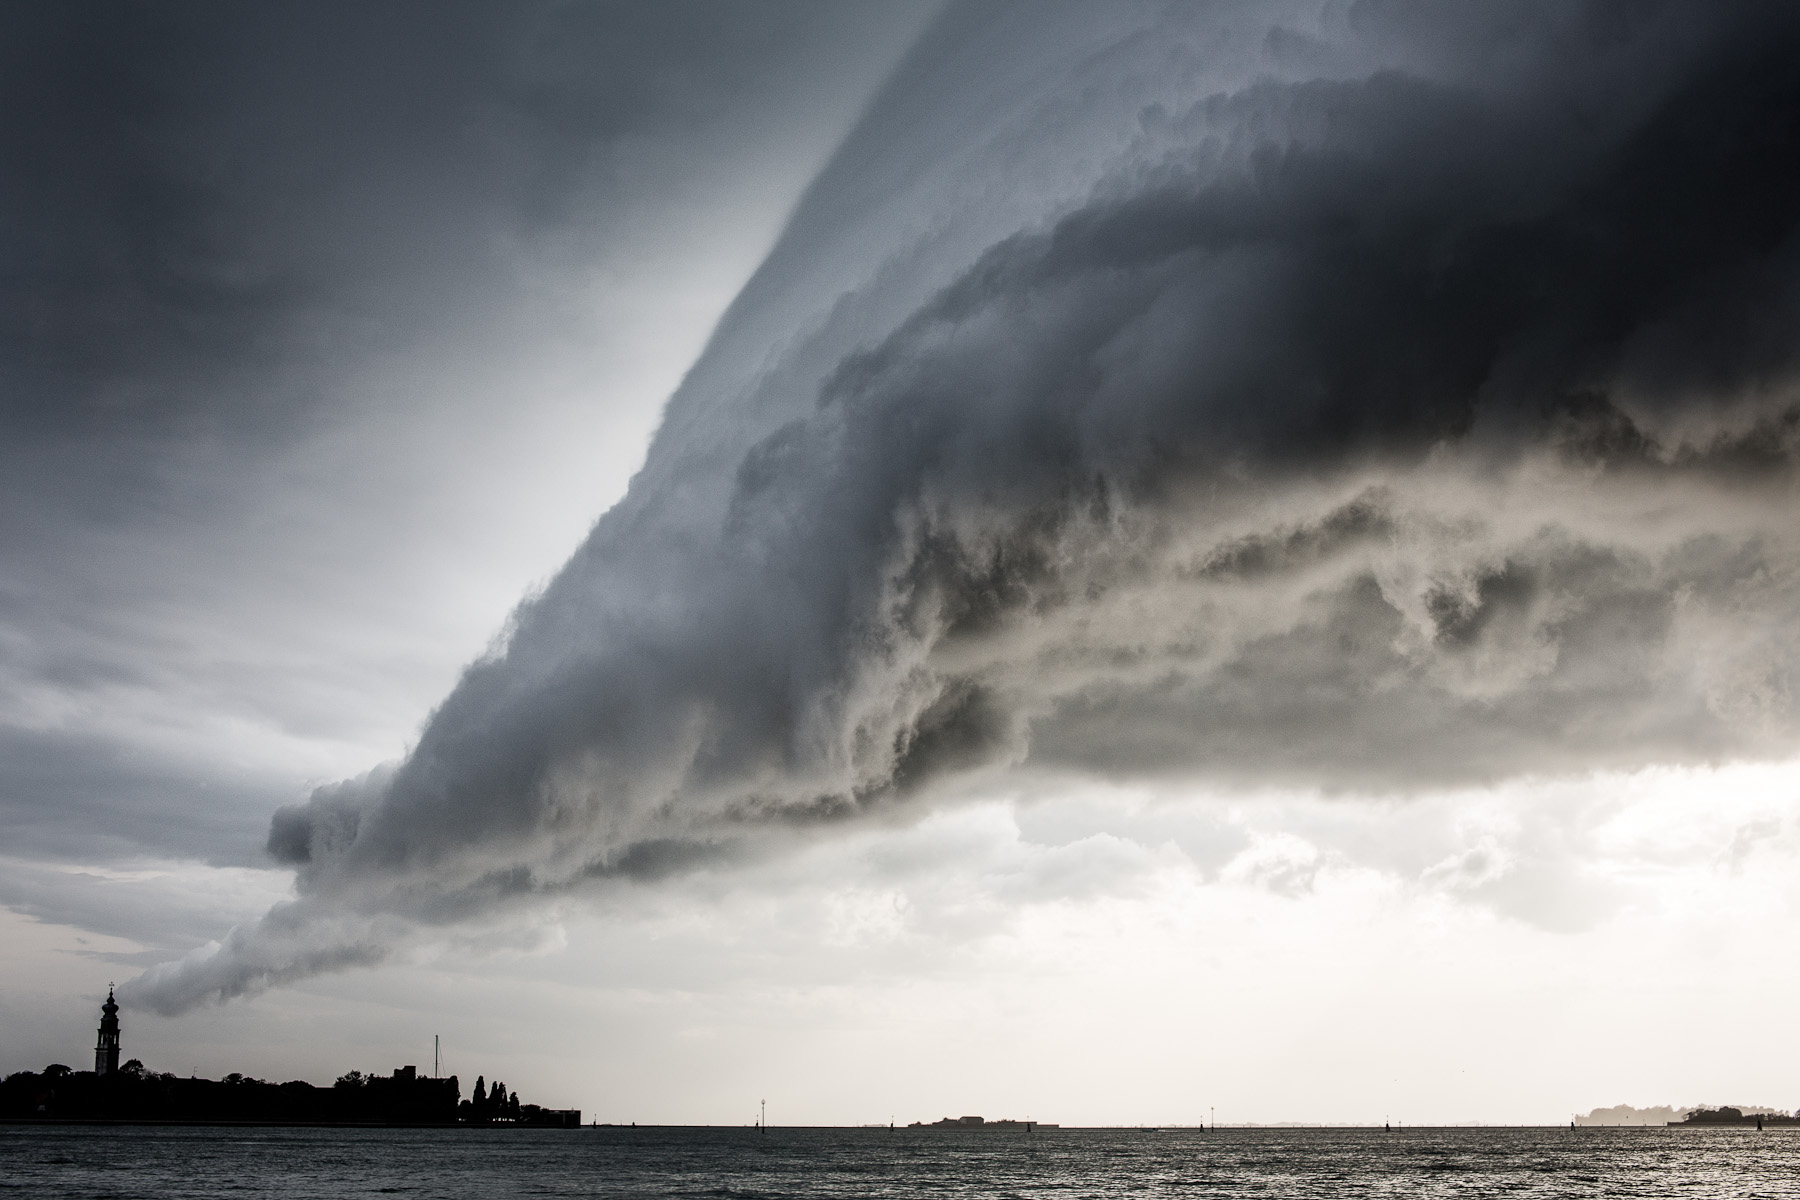 A storm cloud hangs above the San Servolo Island in central lagoon near the main island of Venice on September 26, 2012. Venice is subject to strong storms, Bora and scirocco winds that bring waves and high tides that eventually flood the city. Storms at sea and inland are especially dangerous. The open sea storms bring tides, while the inland storms bring flooding from rivers that flow into the lagoon.